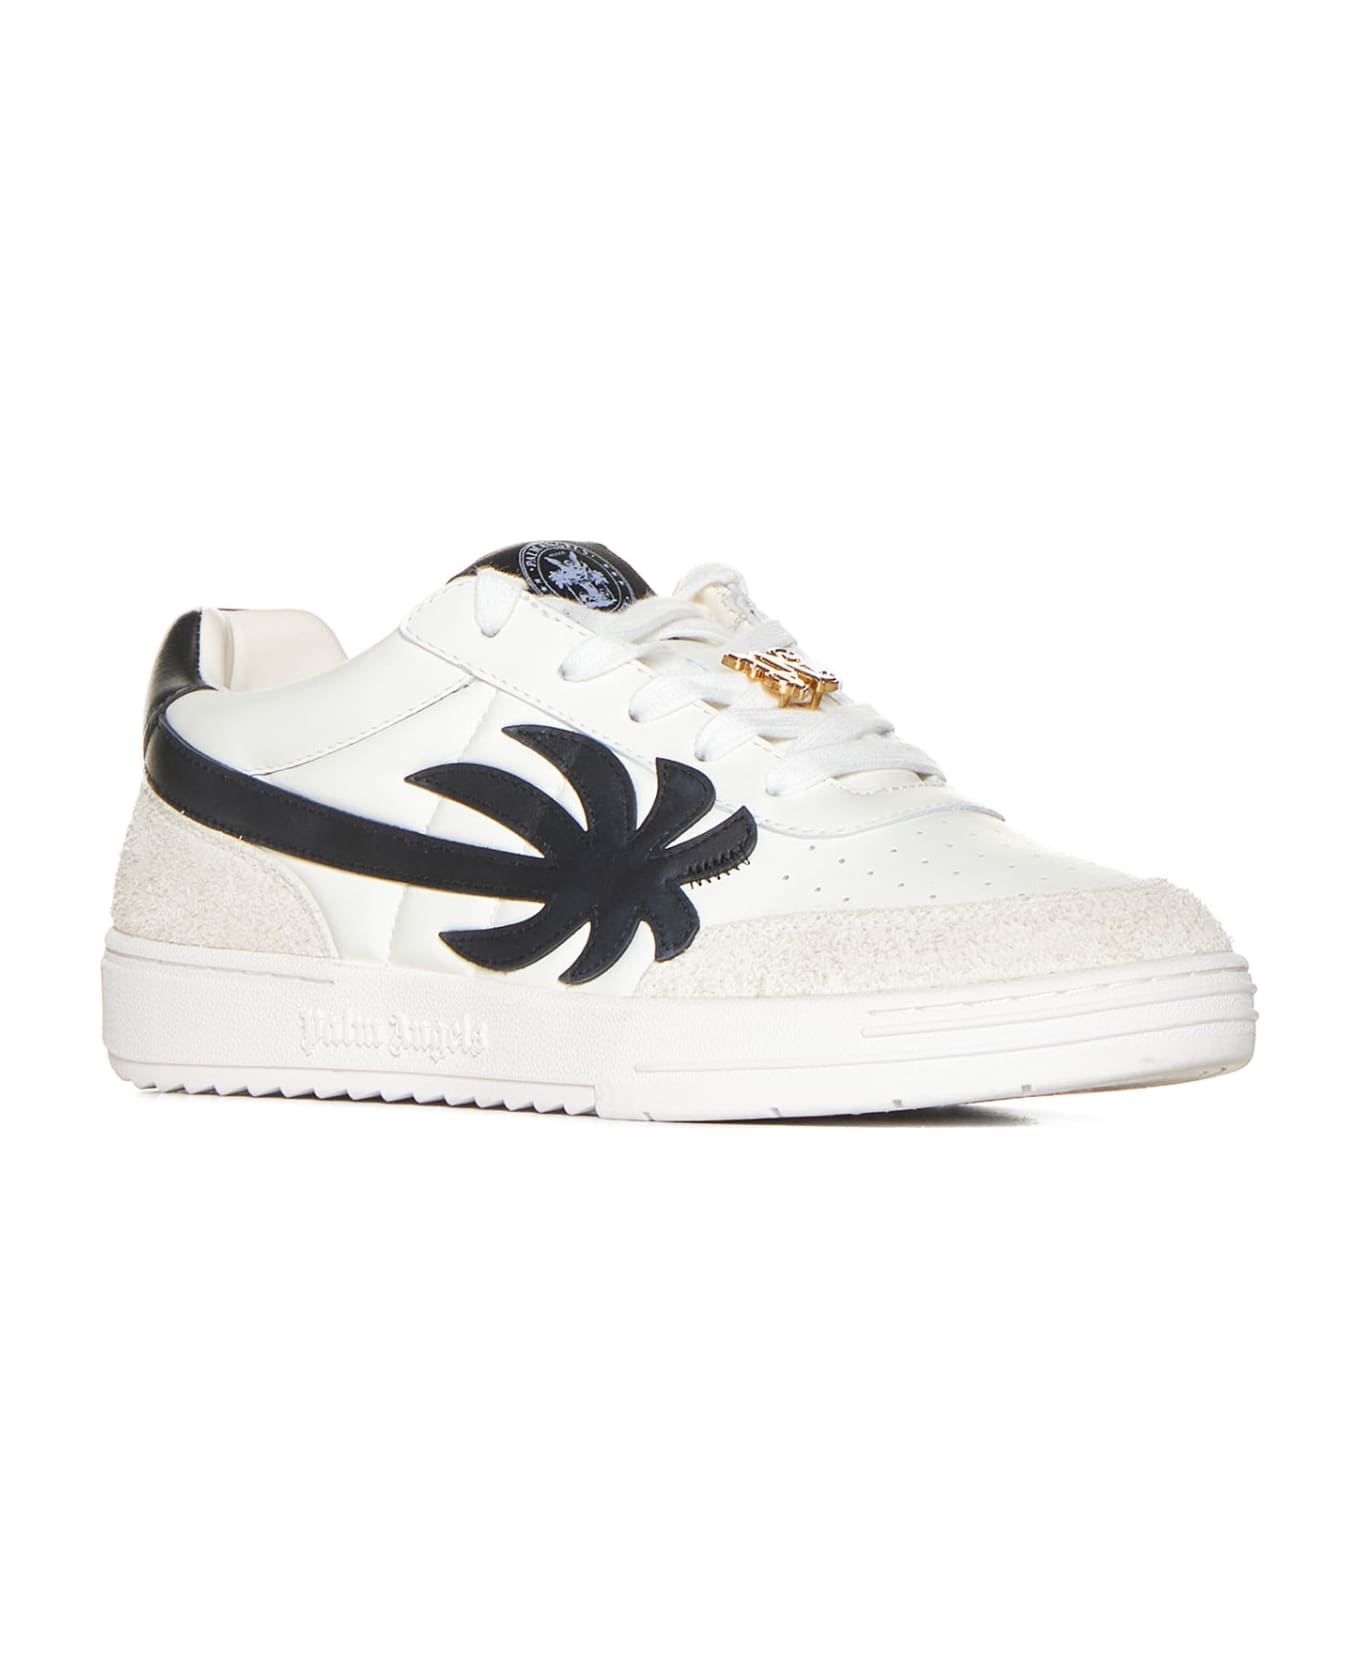 Palm Angels 'palm Beach University' White Leather Sneakers - White BLACK スニーカー